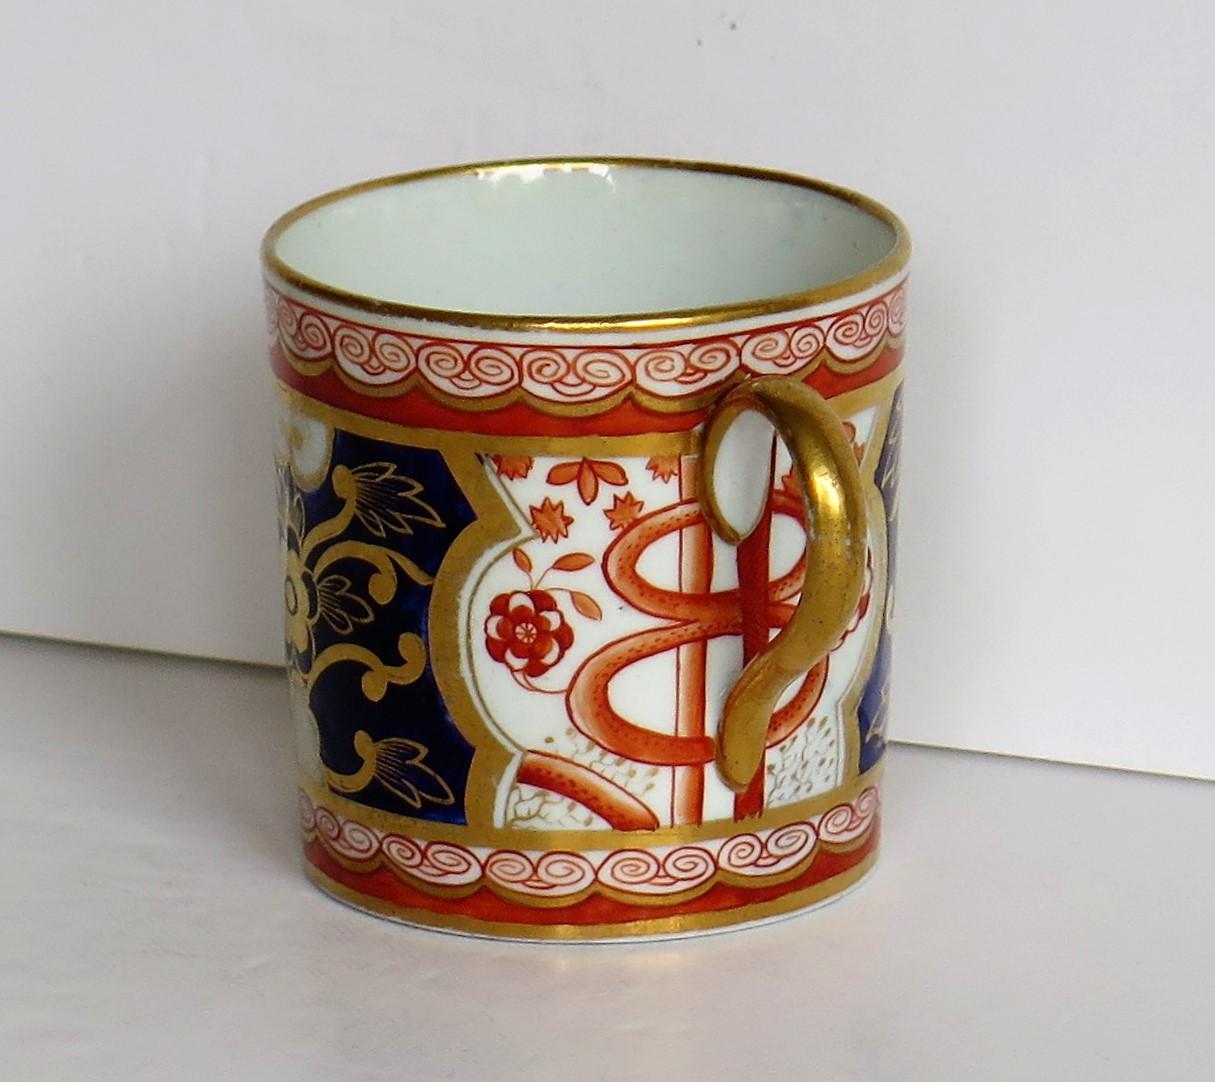 19th Century Georgian Porcelain Coffee Can by Spode Hand-Painted Dollar Ptn 715, circa 1805